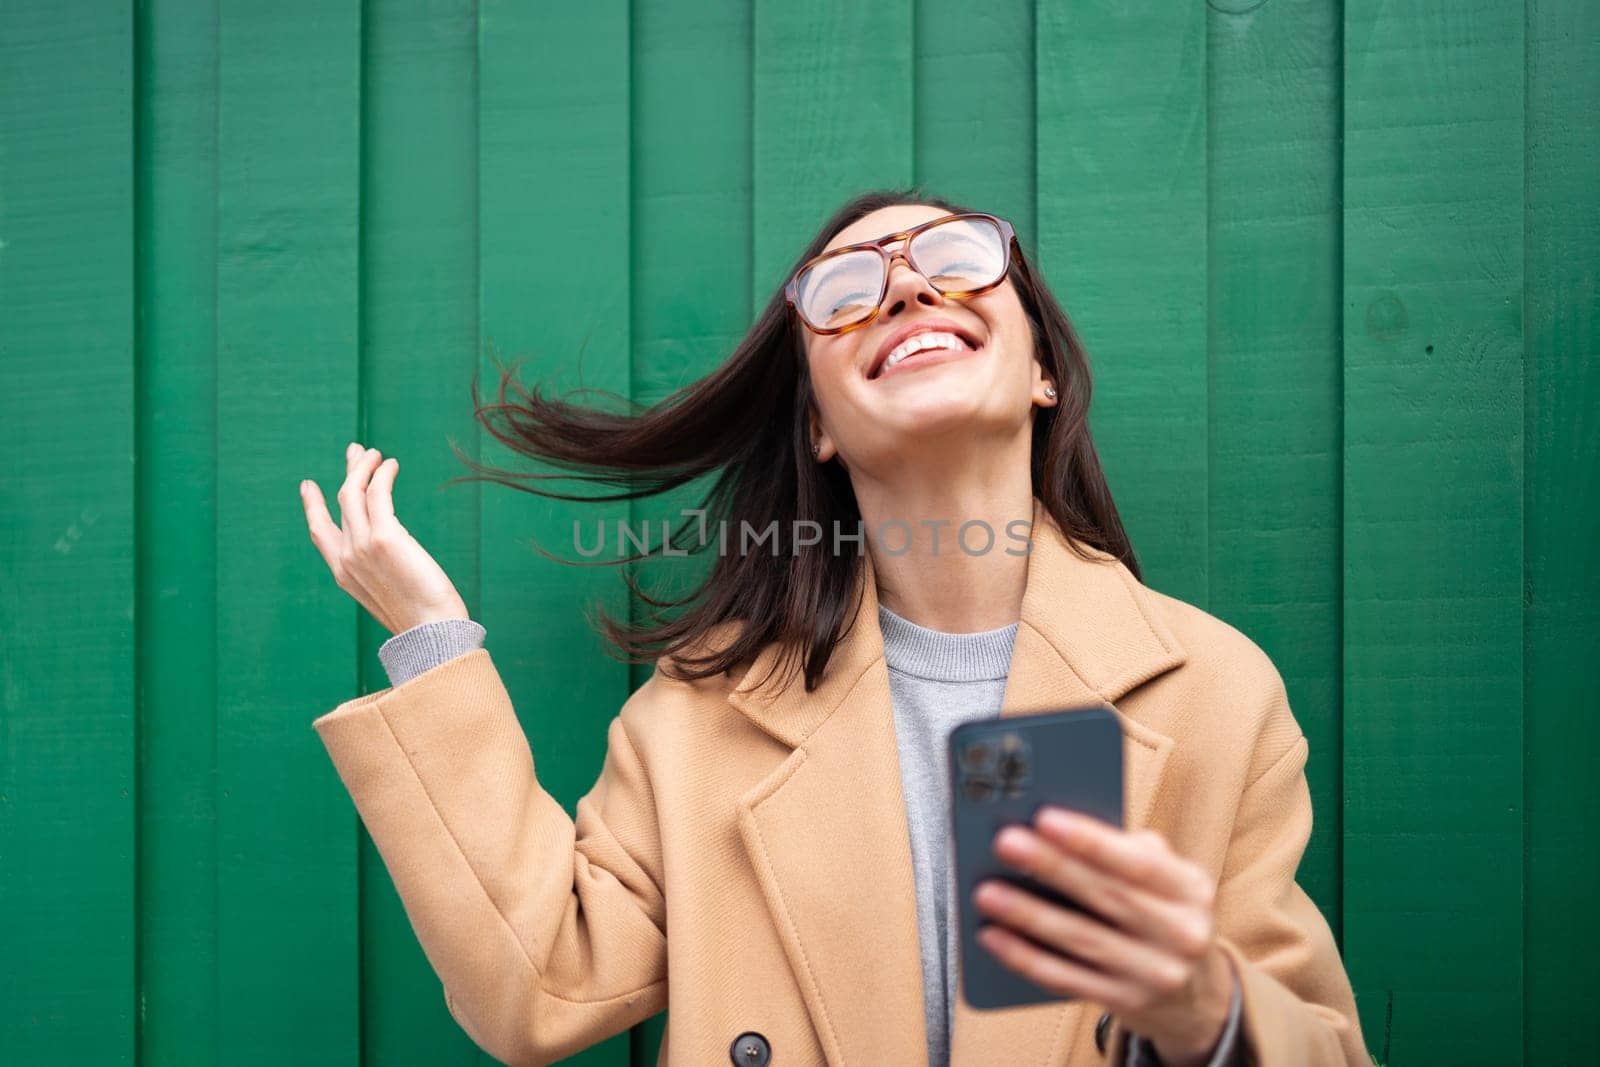 Woman with smartphone leaning against wall fixes hair hold phone in hand. Portrait of happy smiling adult young woman dressed stylish beige coat standing outdoor. Positive emotions